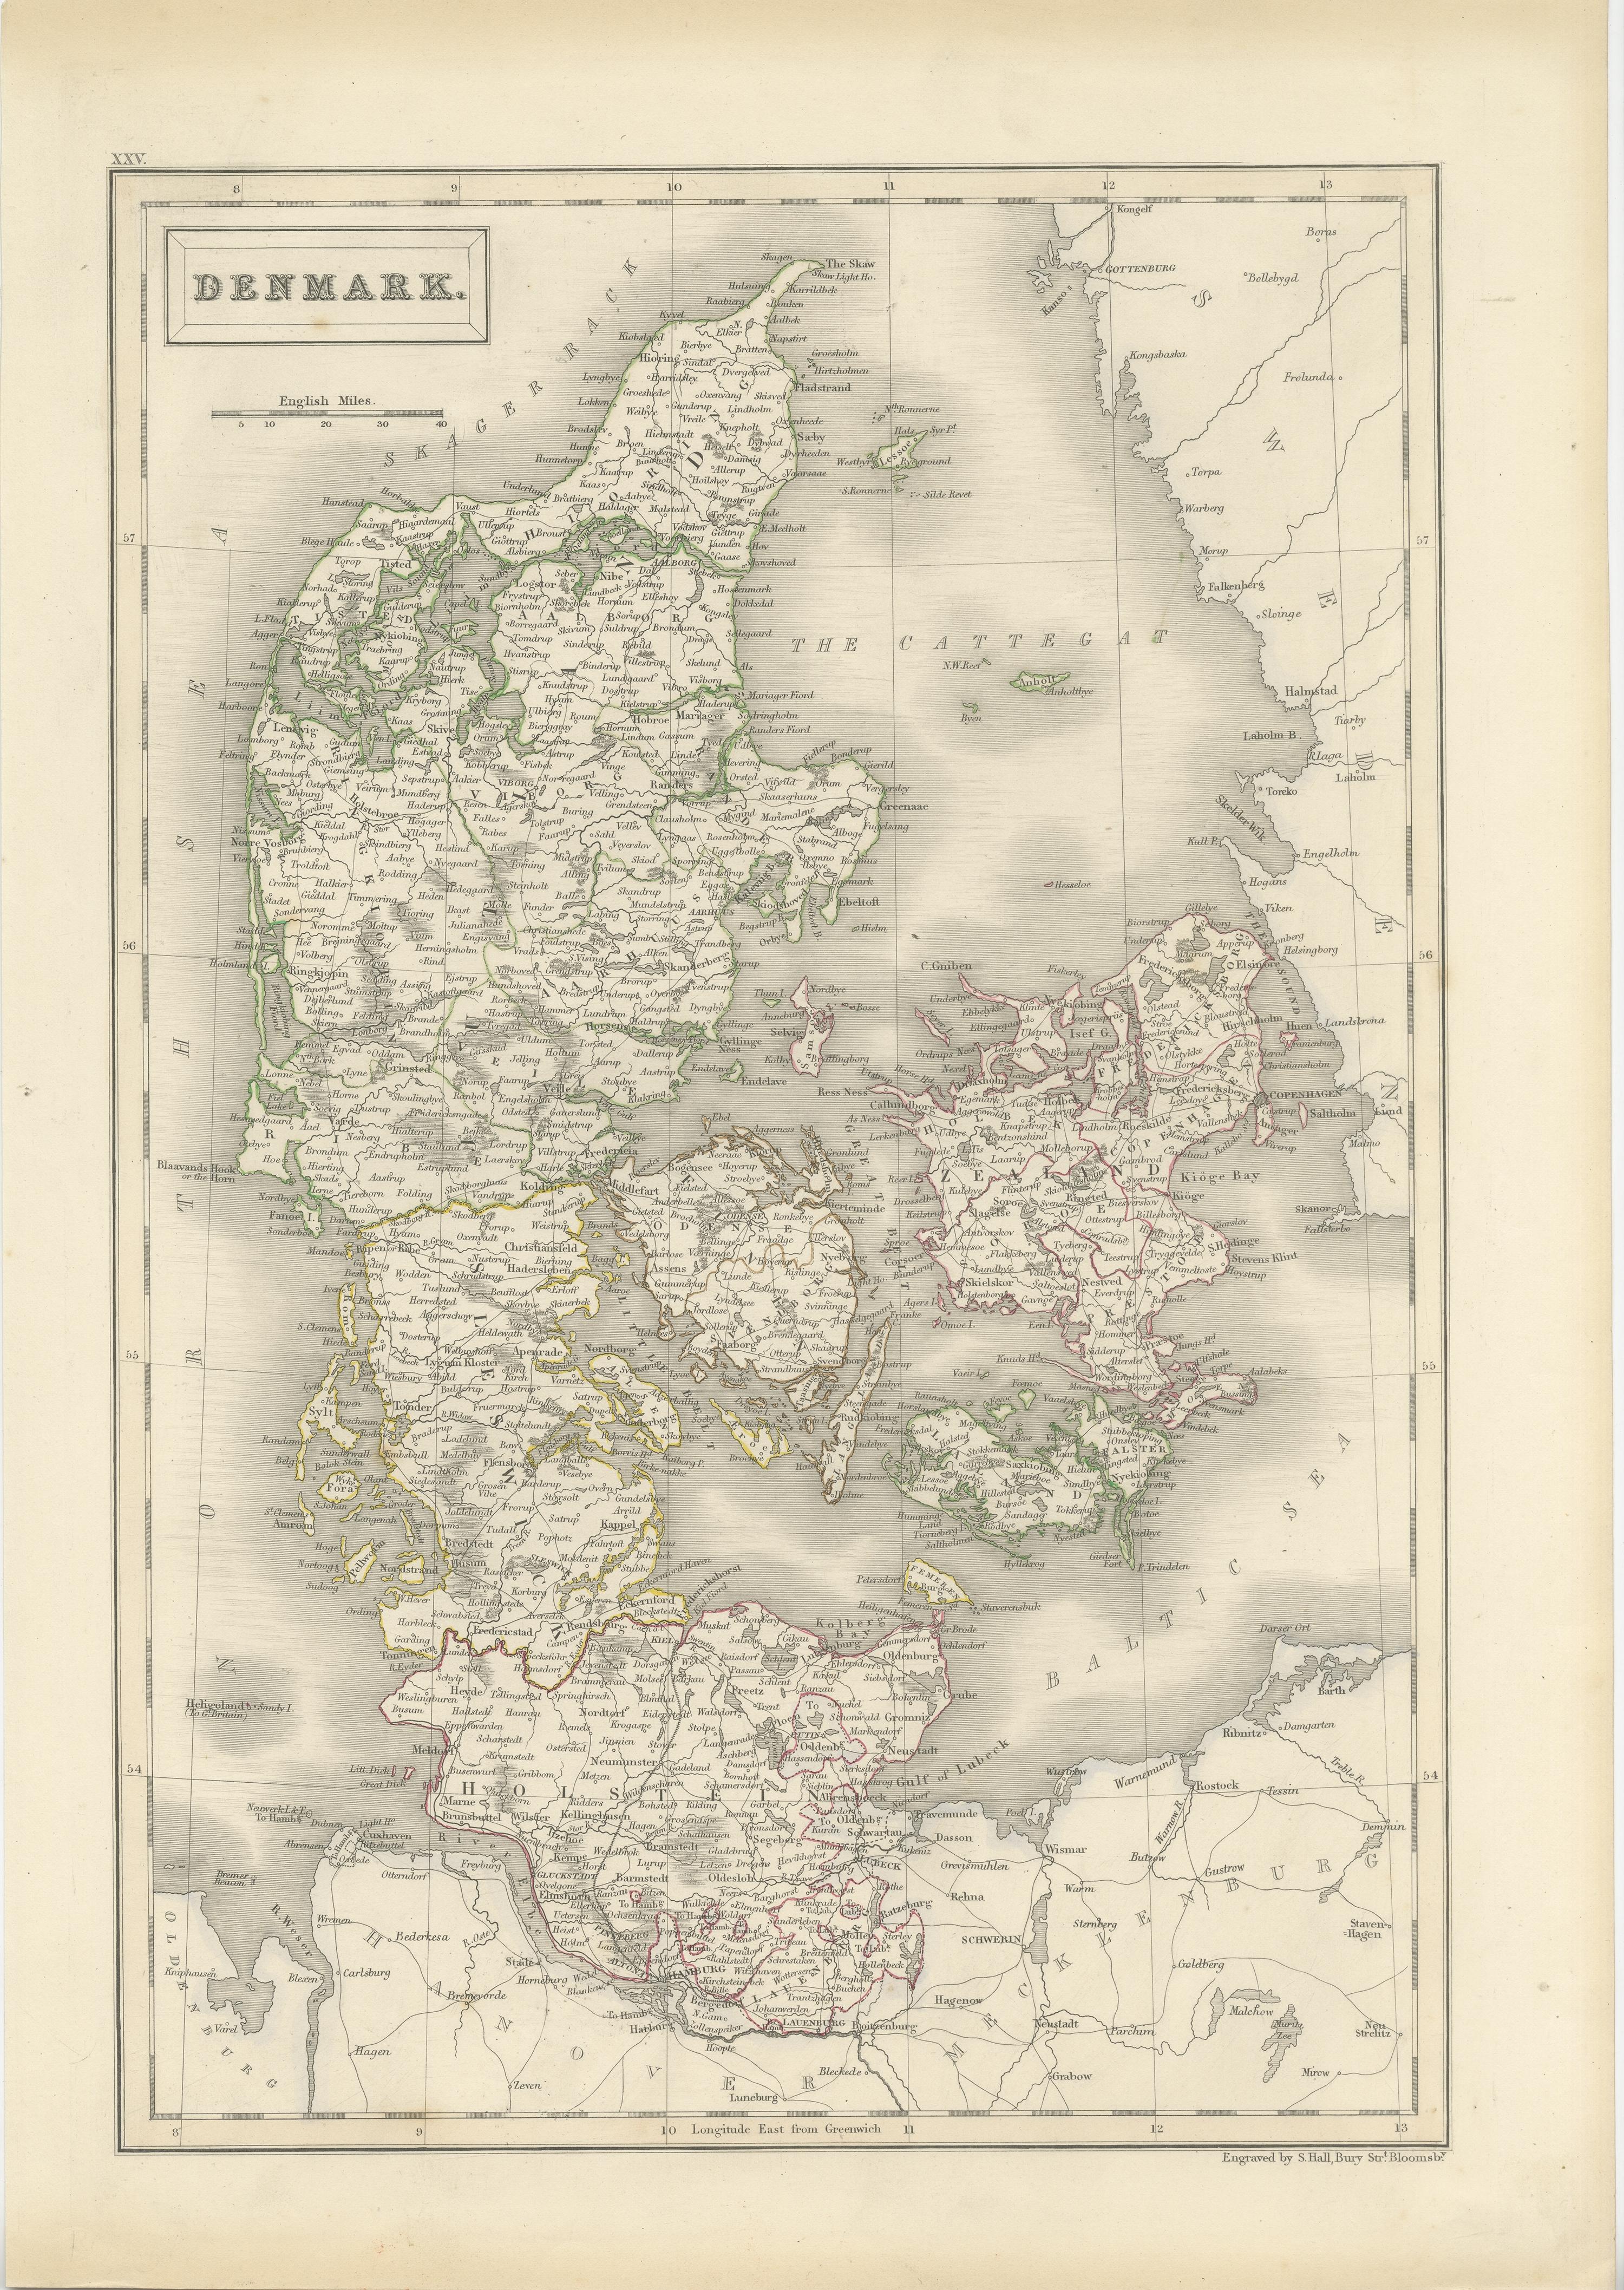 Antique map titled 'Denmark'. A map of Denmark and the direct surroundings (northern Germany, Baltic Sea, Kattegatt and North Sea, south east Sweden). Sheet XXV from an unidentified English atlas, published in London, circa 1820.

Artists and